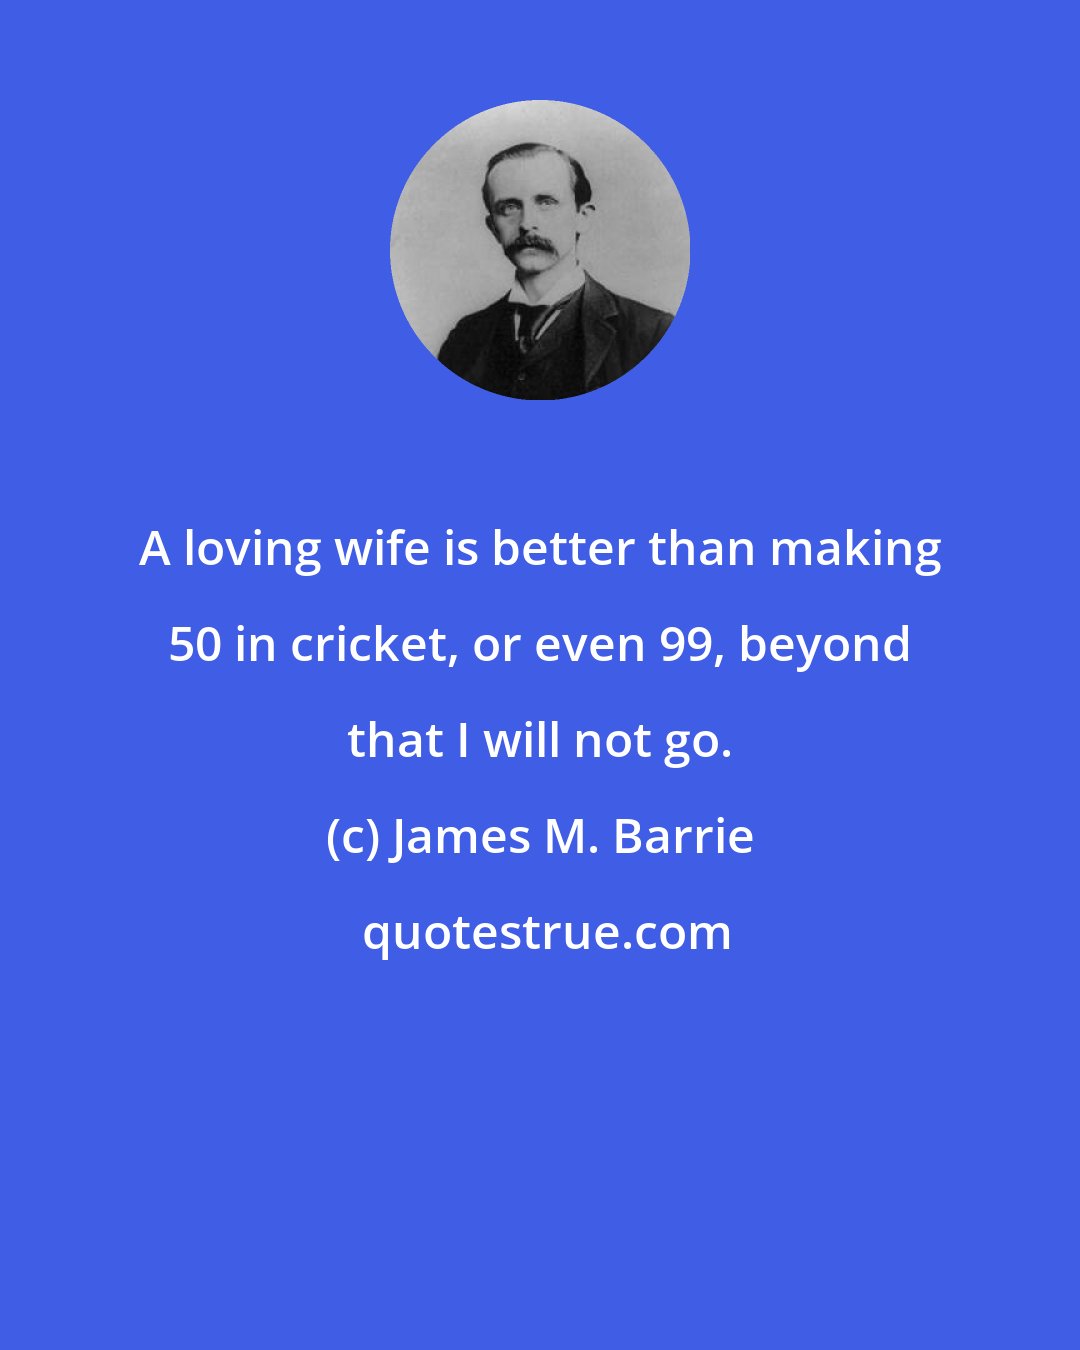 James M. Barrie: A loving wife is better than making 50 in cricket, or even 99, beyond that I will not go.